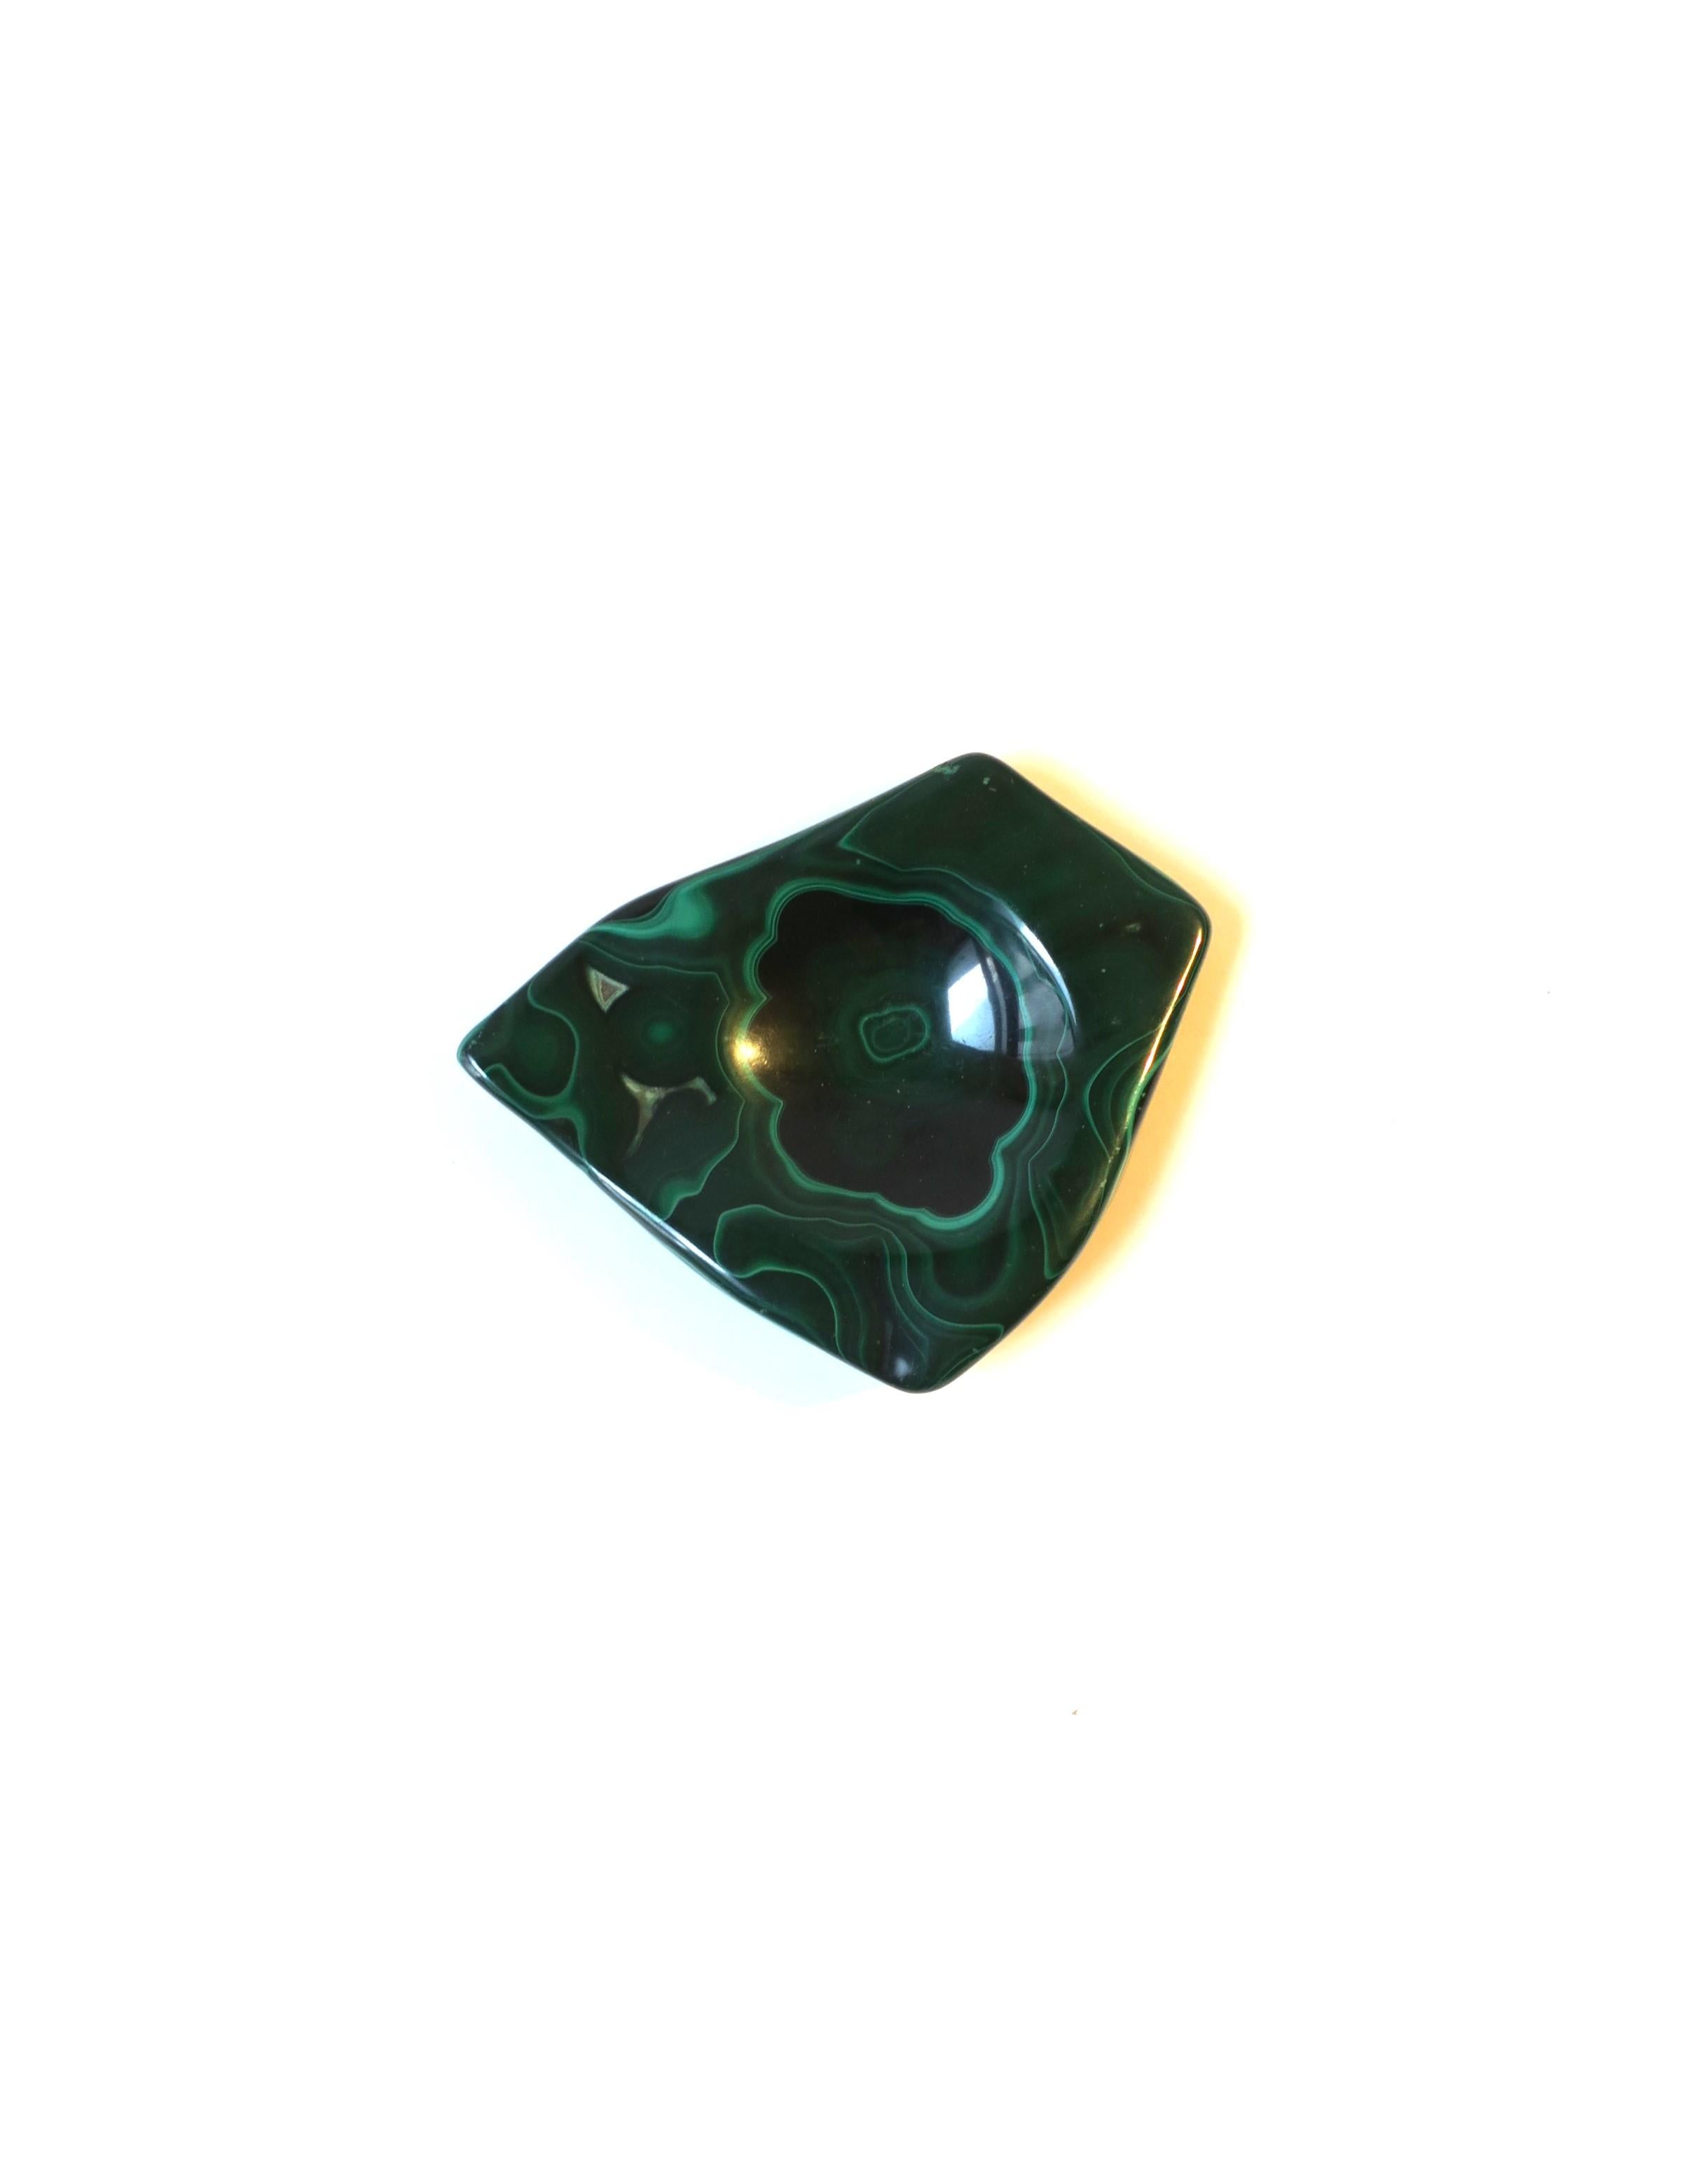 A beautiful natural emerald green malachite jewelry dish vide-poche with an abstract shape, in the organic modern style. A great piece for a desk, vanity, nightstand table, or other area to hold small items. Shown holding a cocktail ring. A